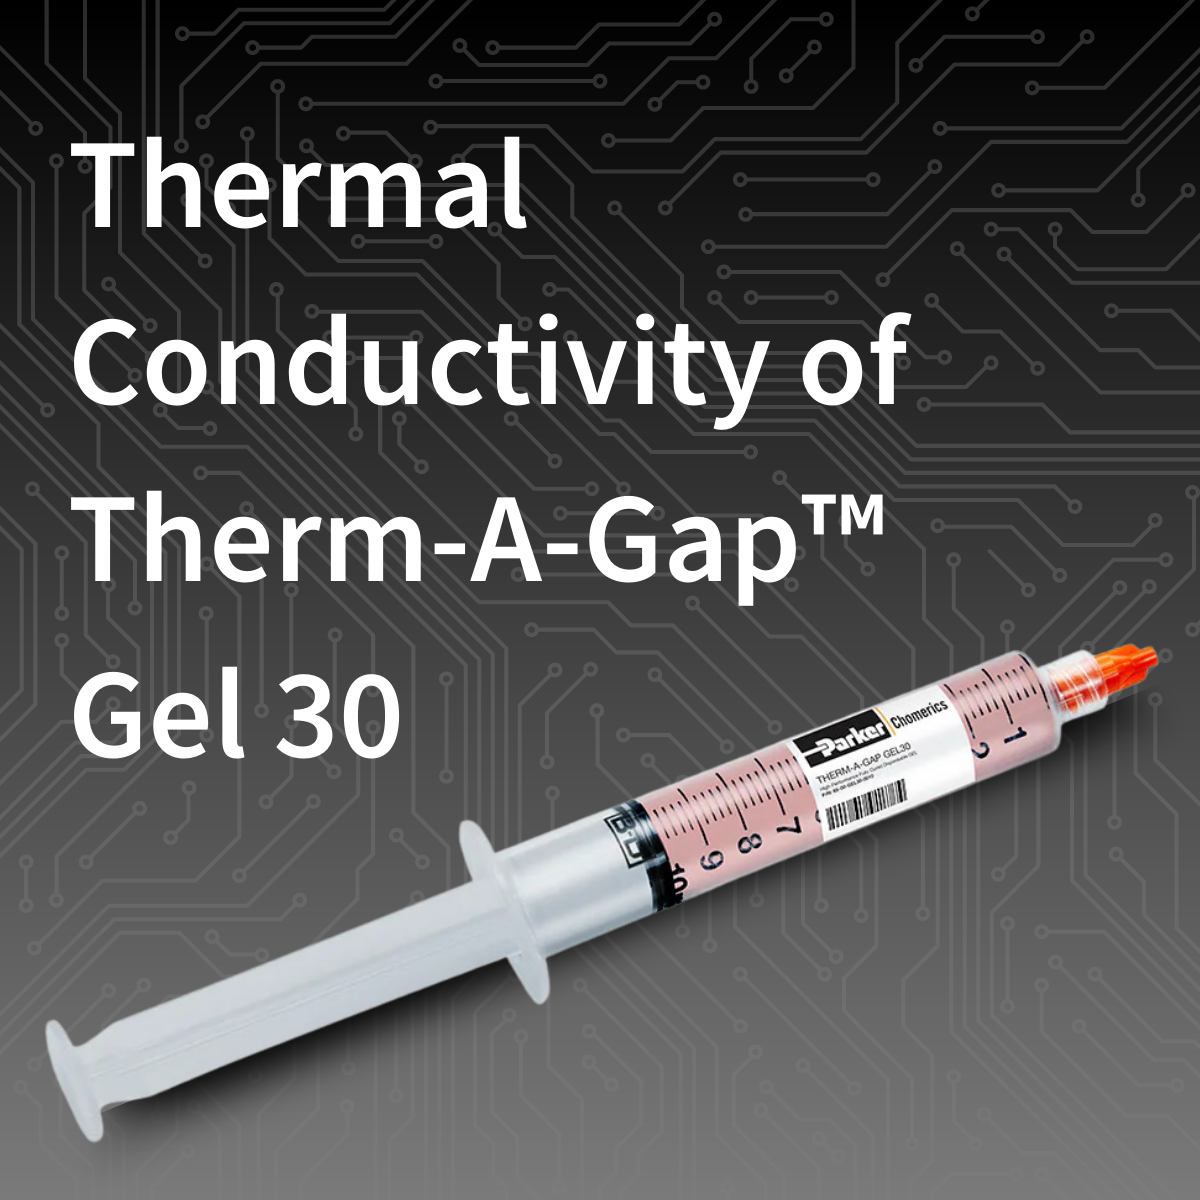 Thermal Conductivity of Therm-A-Gap™ Gel 30